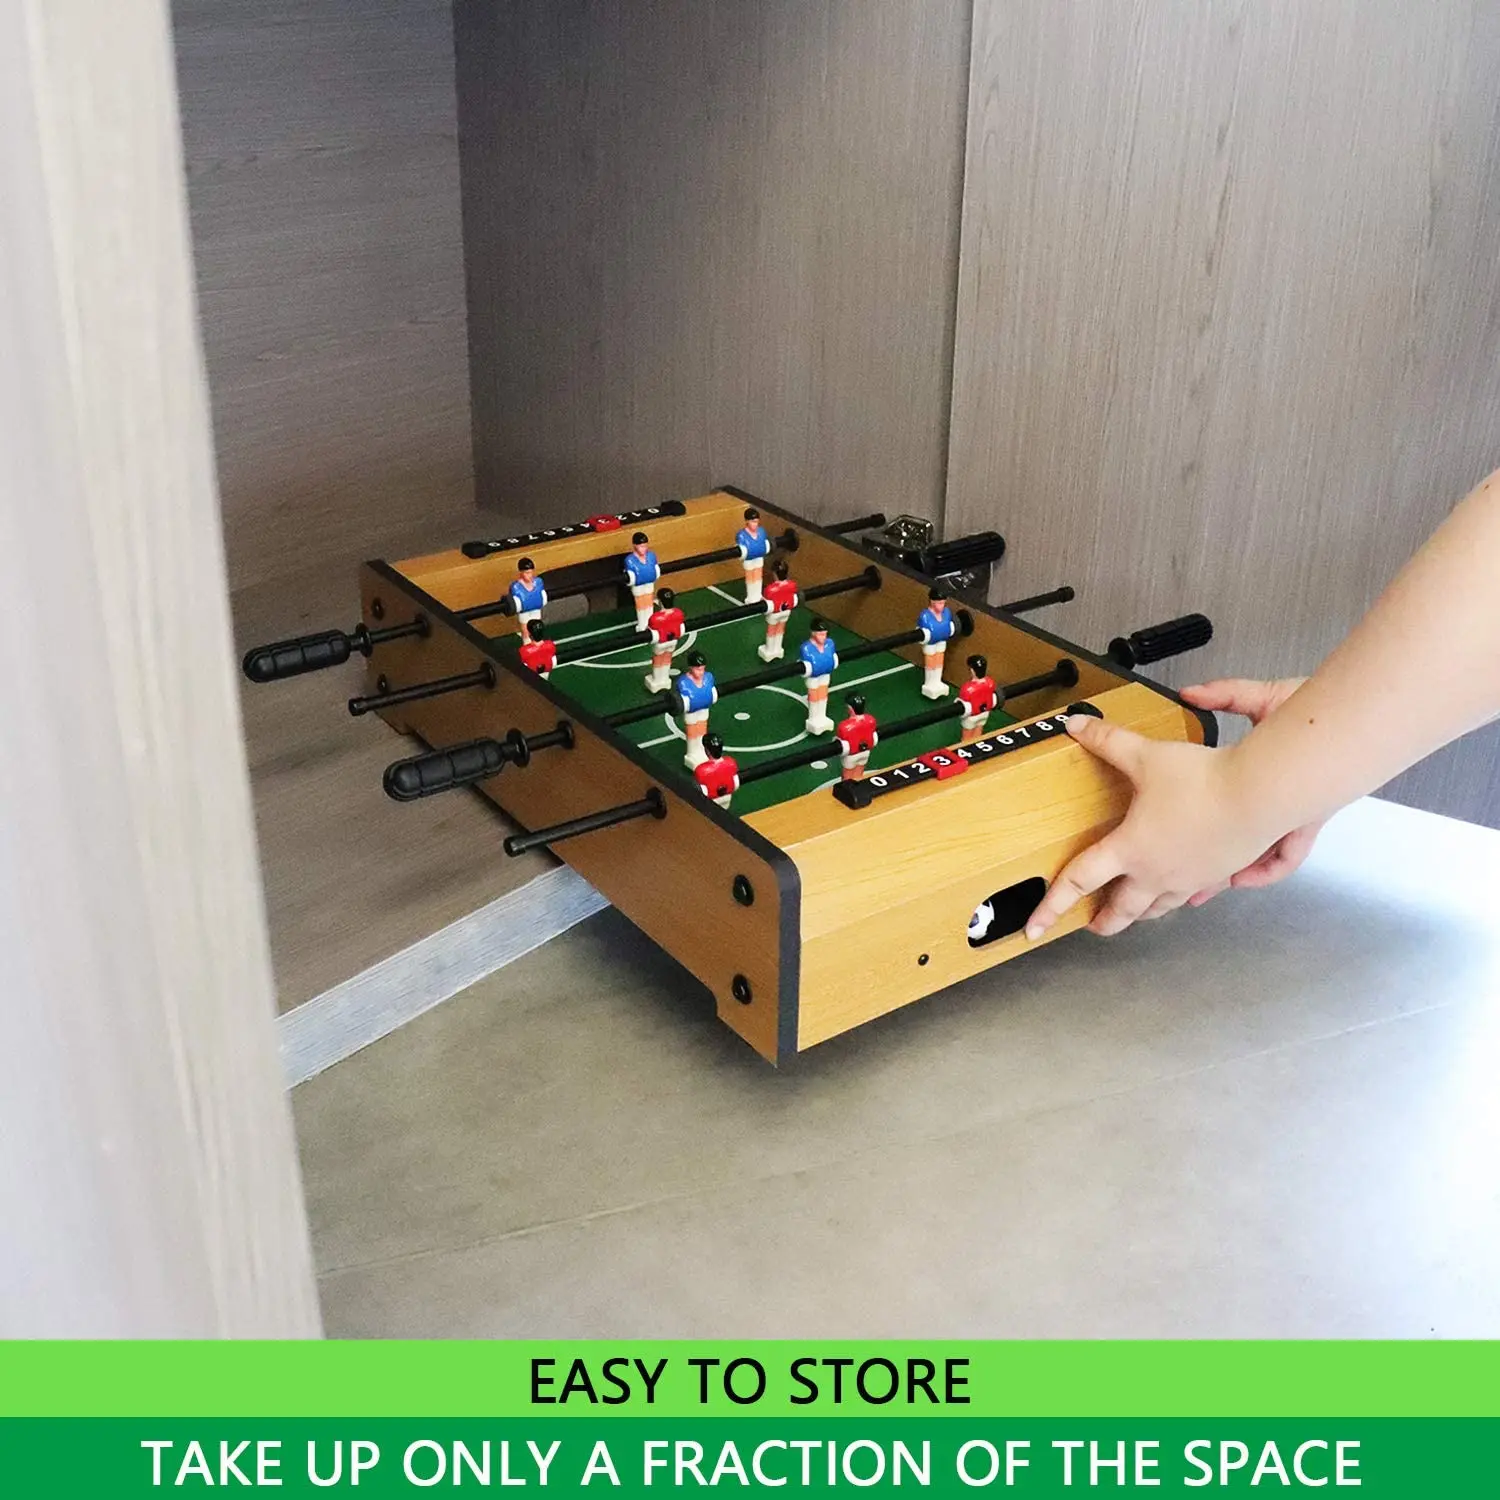 XTZJ Foosball Table 20-Inch Table Top Football/Soccer Game Table for Kids Easy to Store 